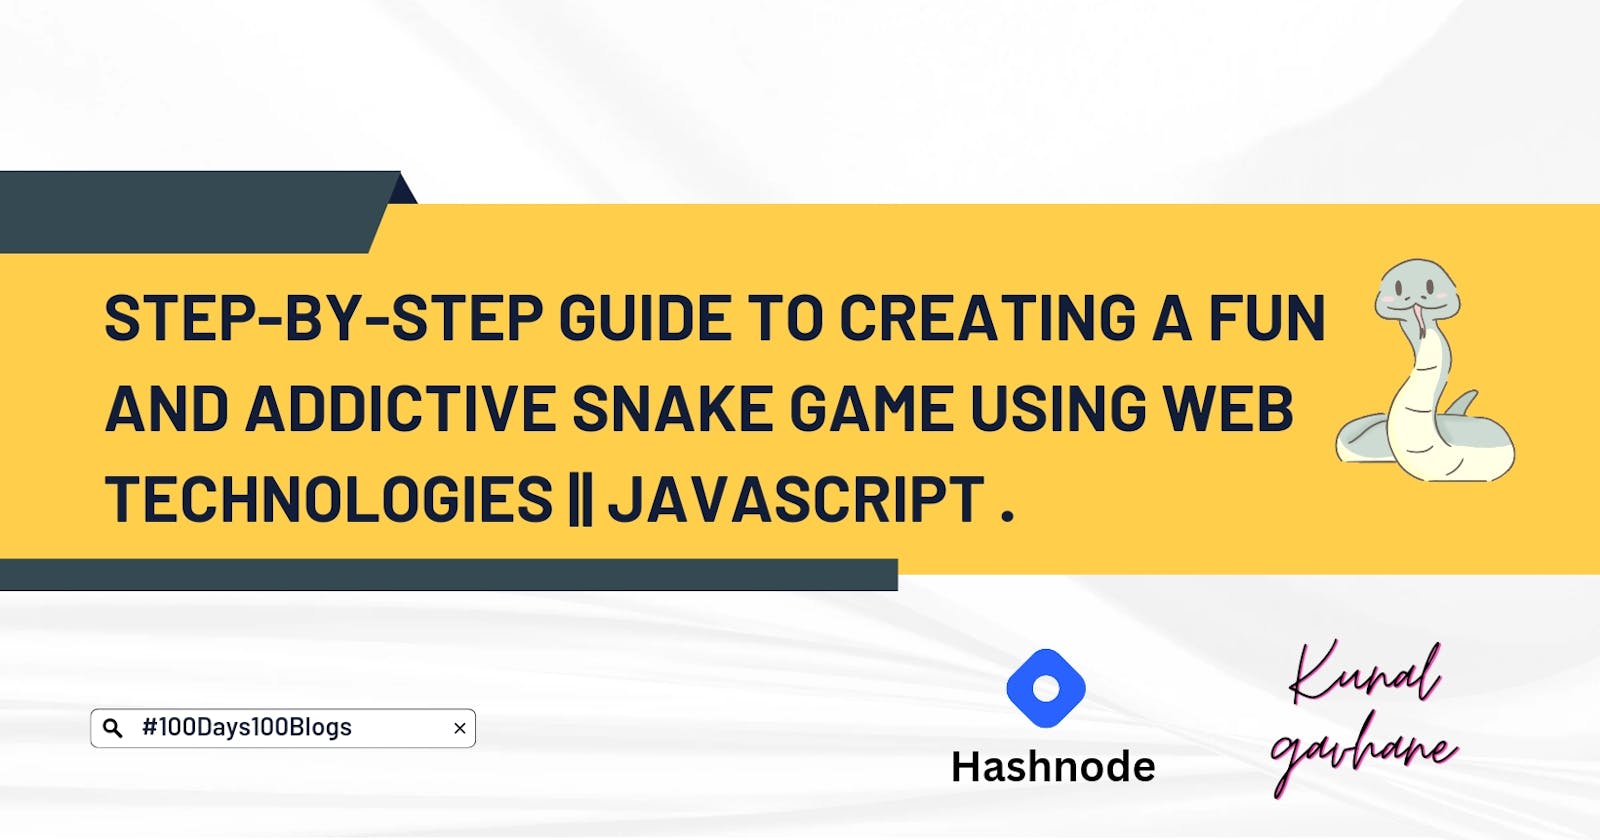 Step-by-Step Guide to Creating a Fun and Addictive Snake Game Using Web Technologies.